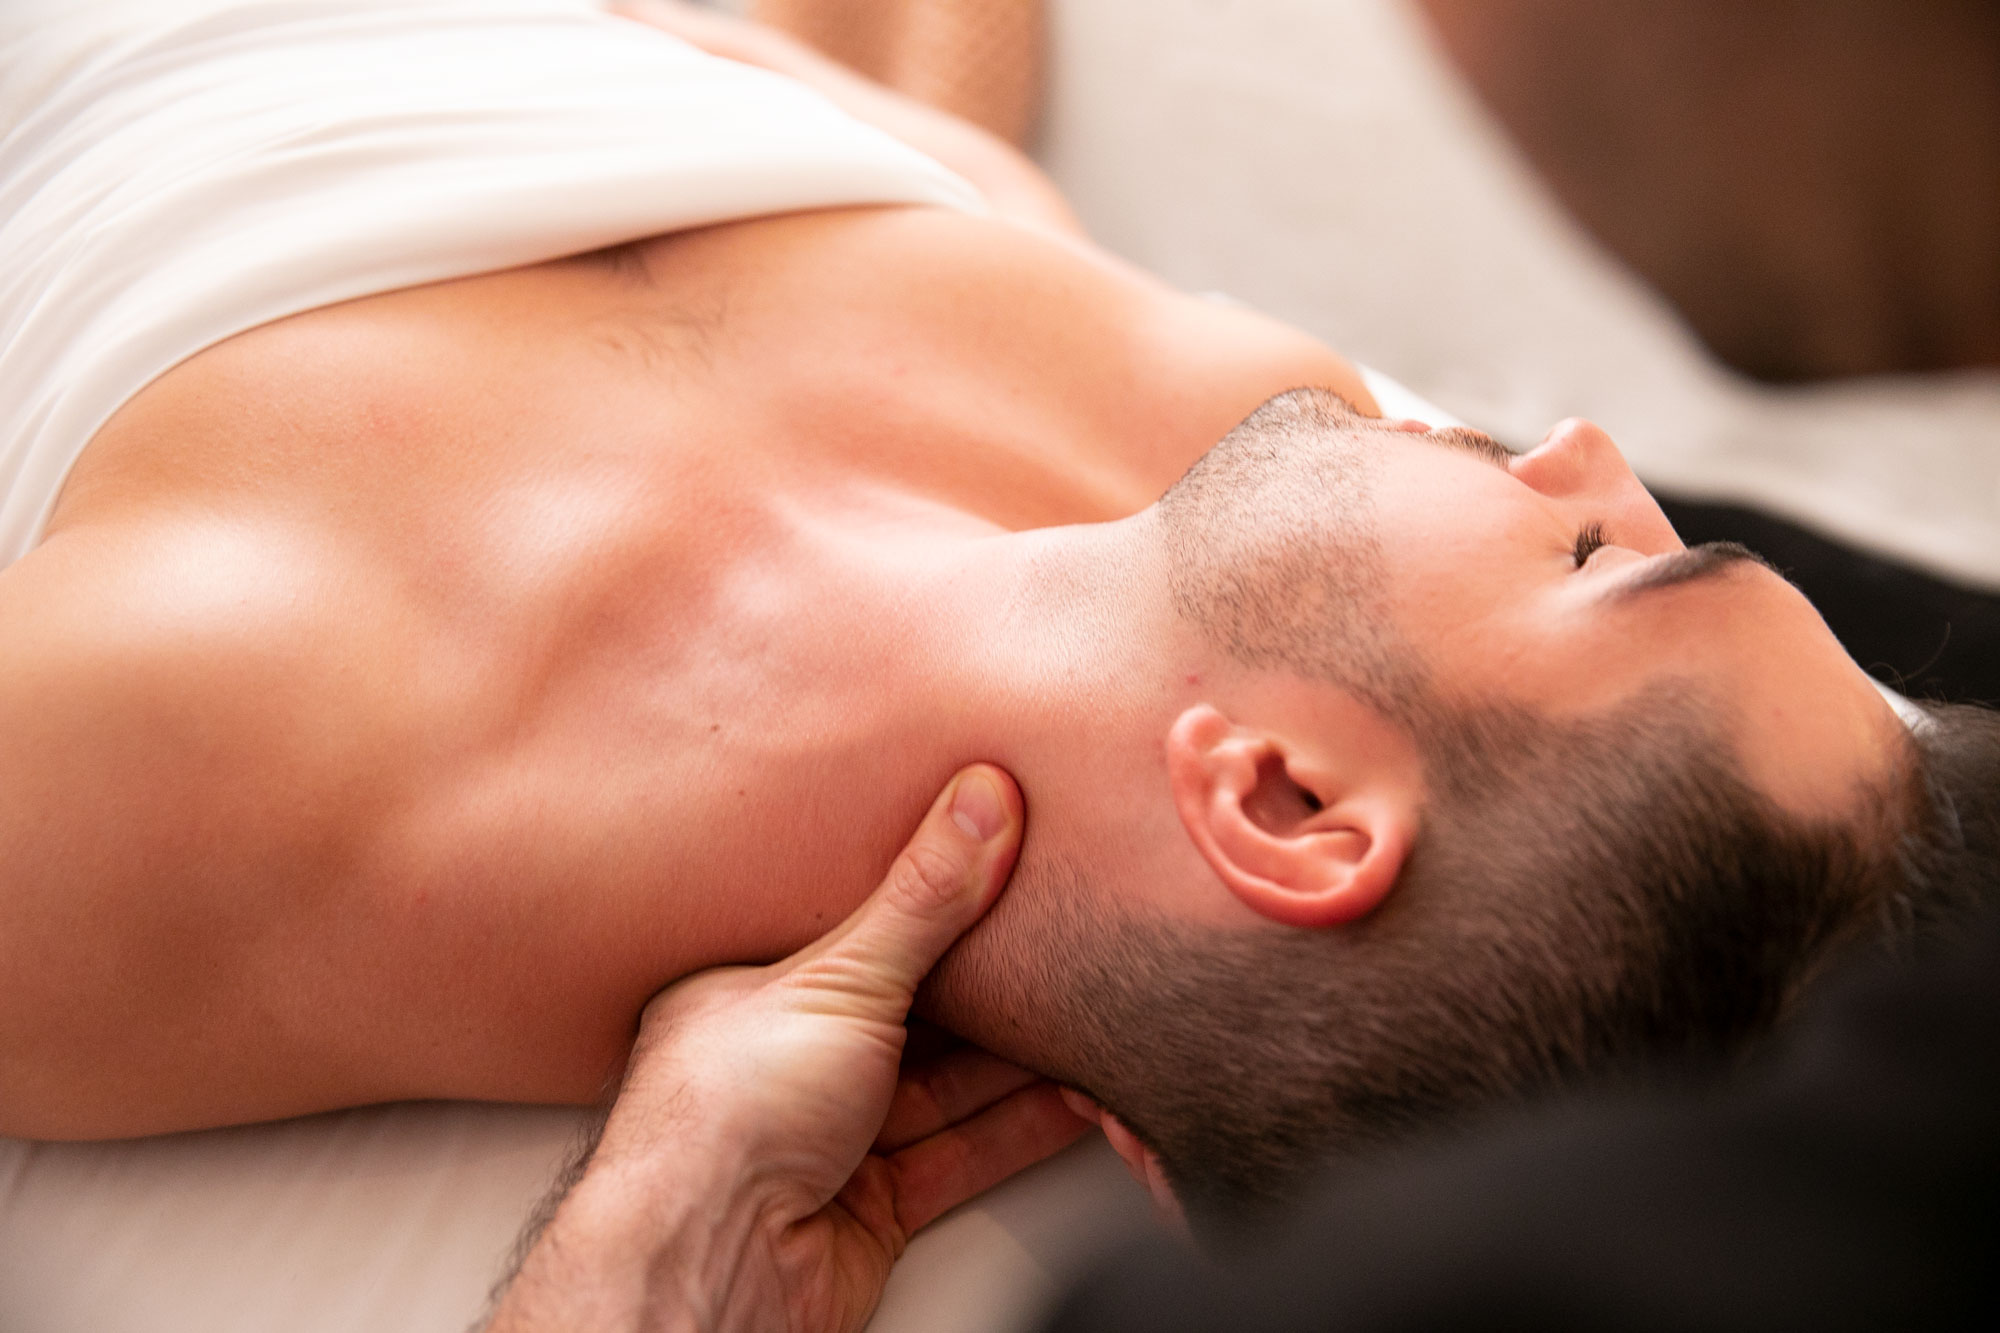 Massage: The Great Things It Can Do For You